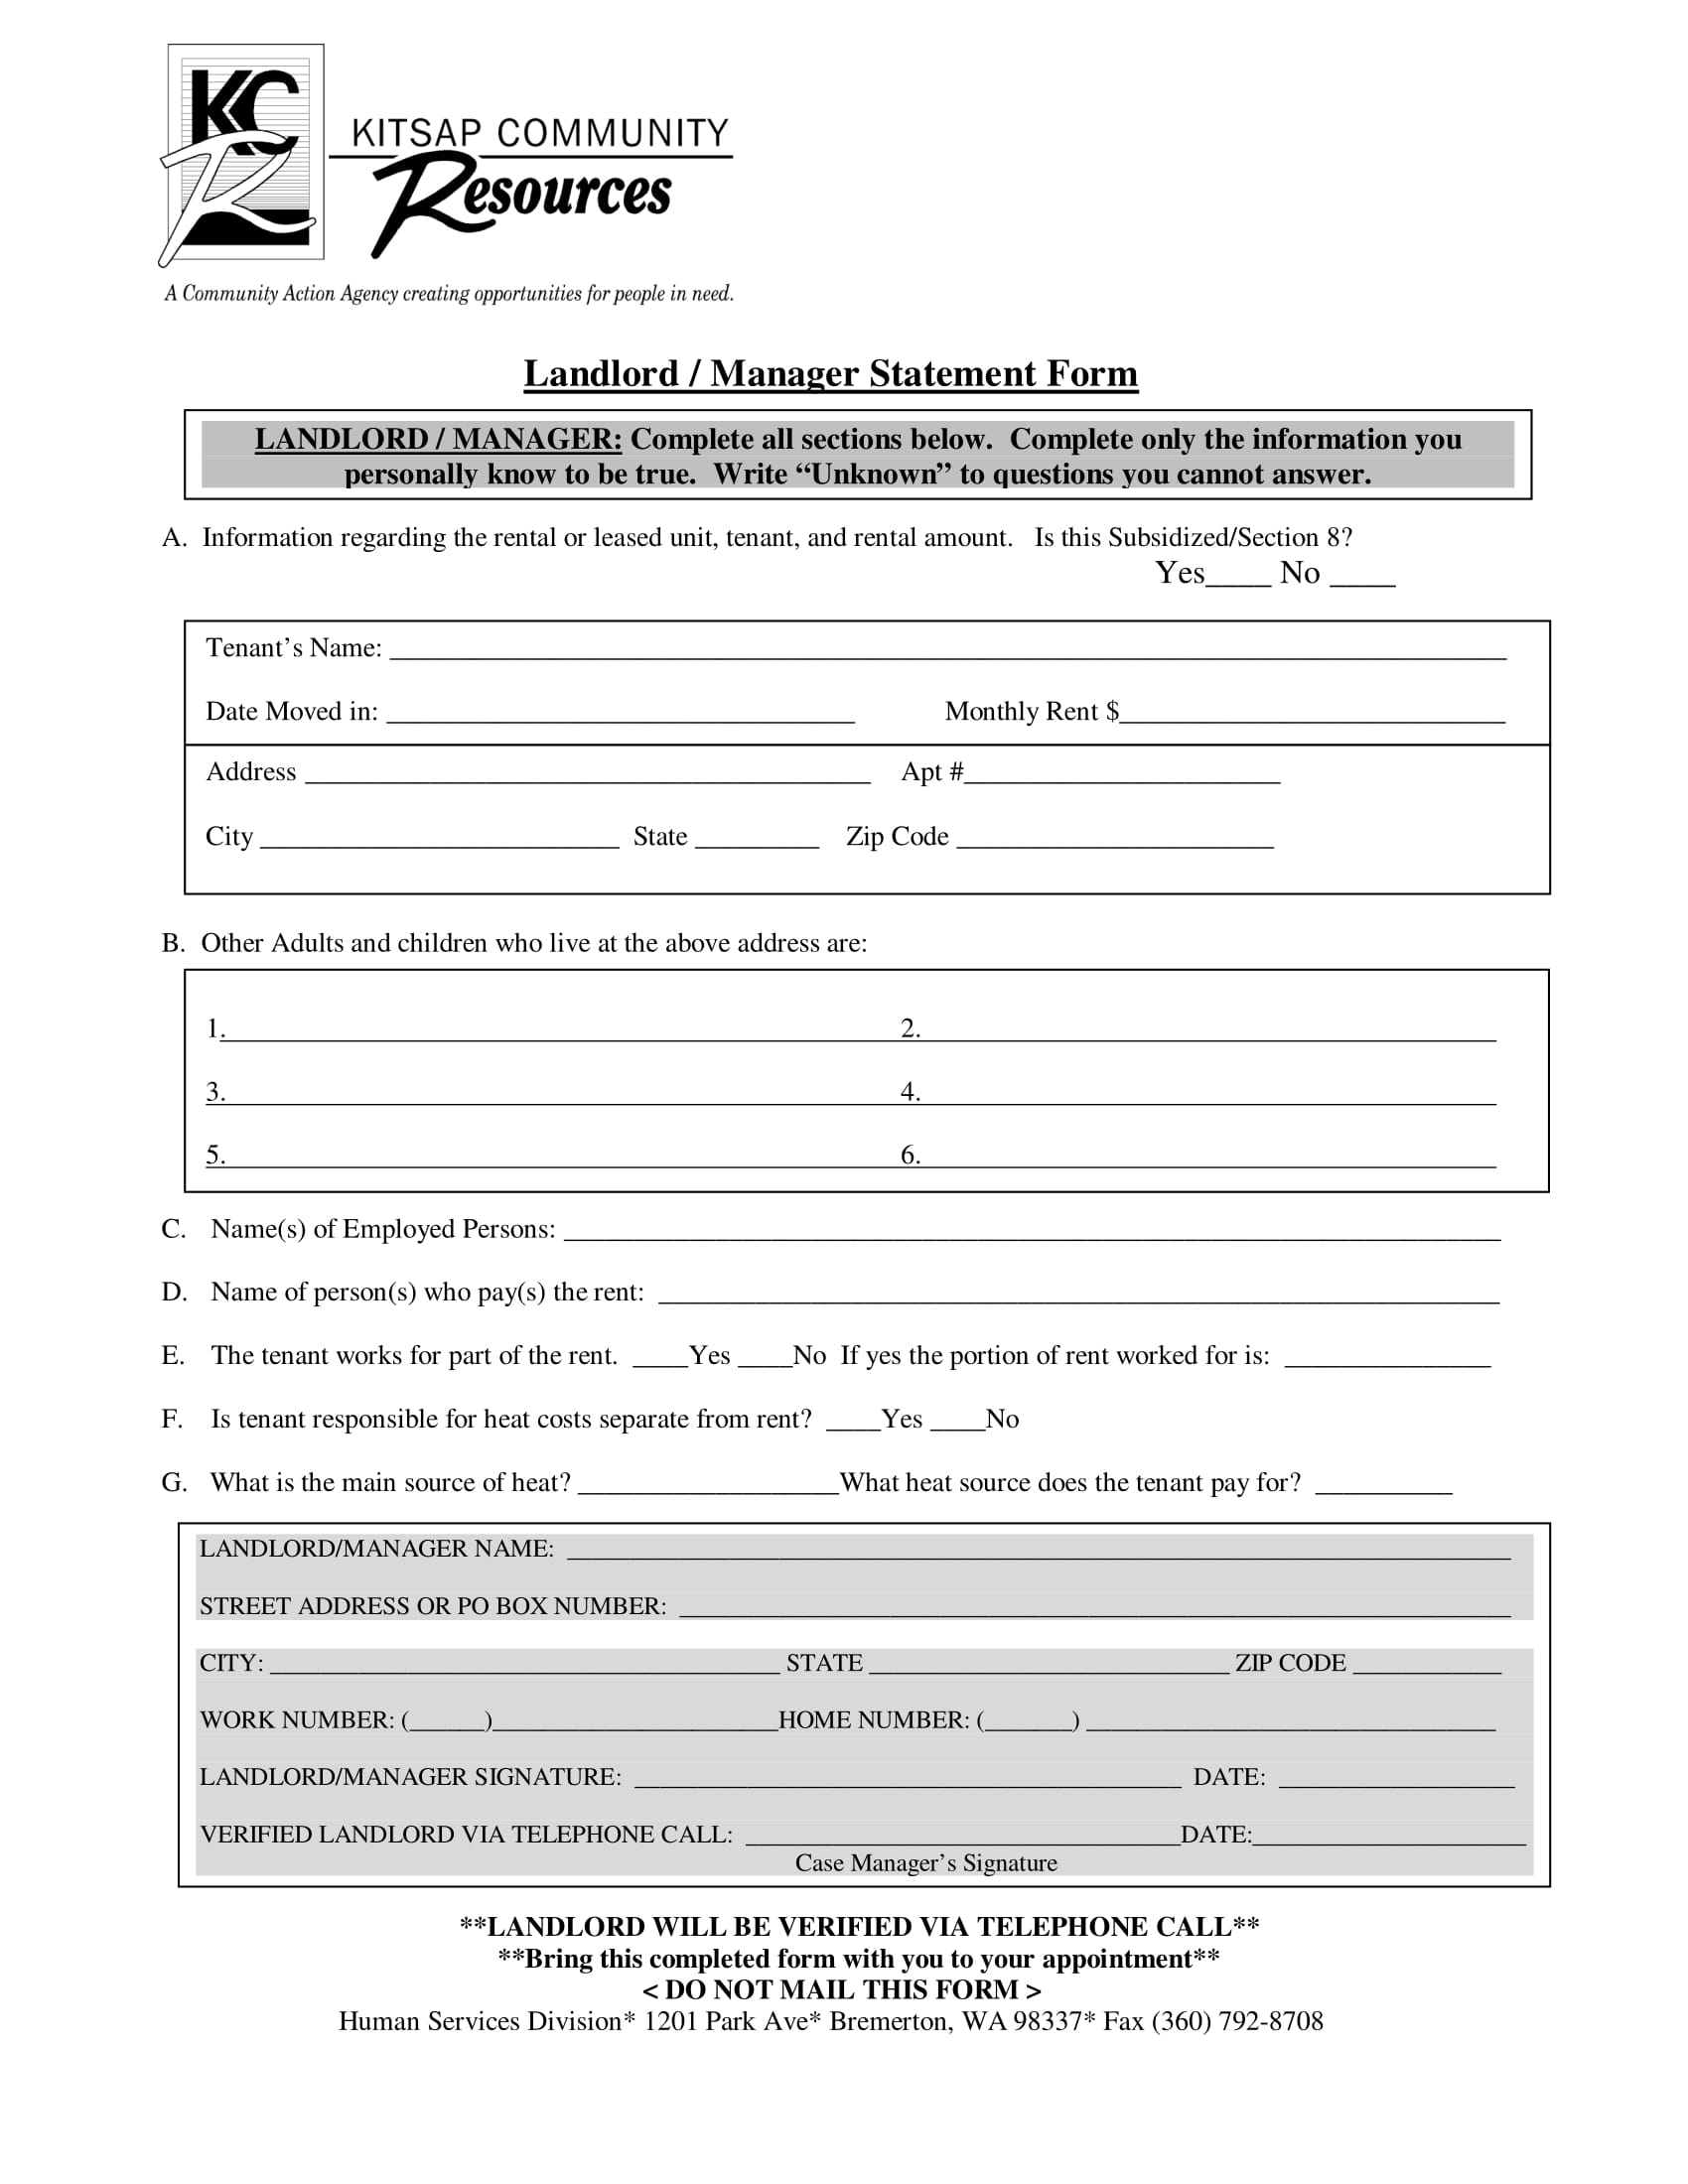 community landlord manager statement form 1